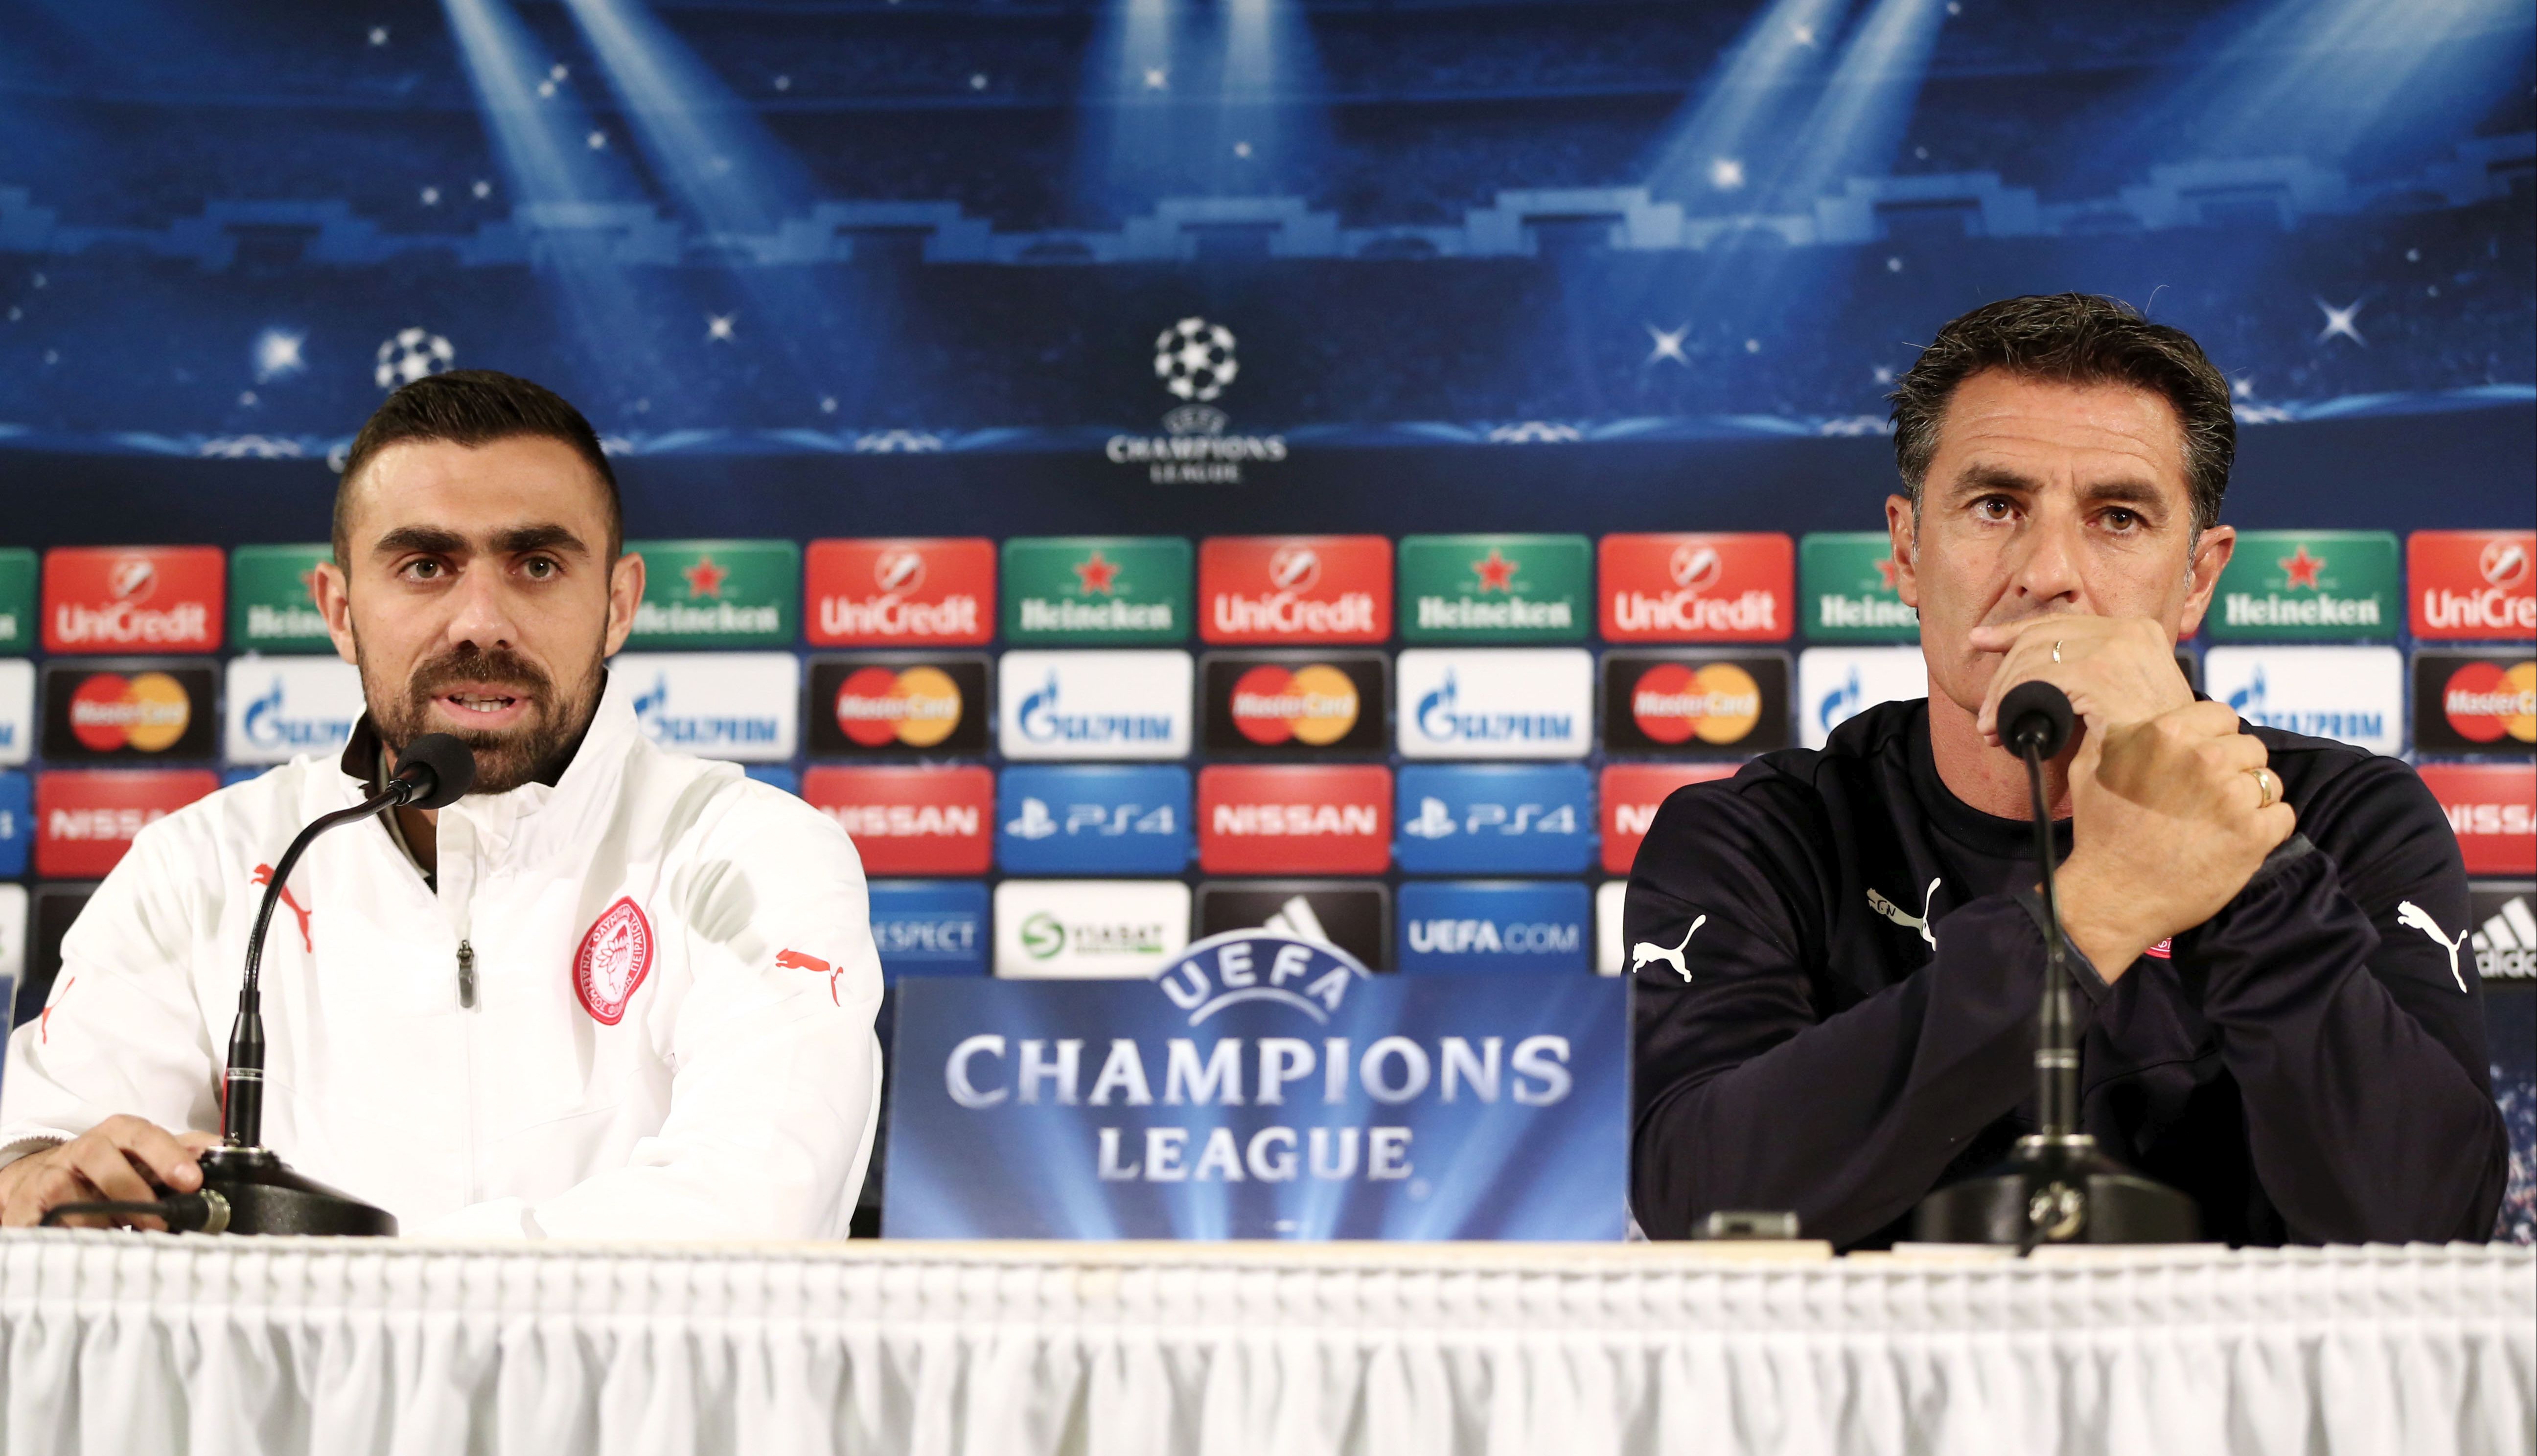 The press conference before the match against Malmö